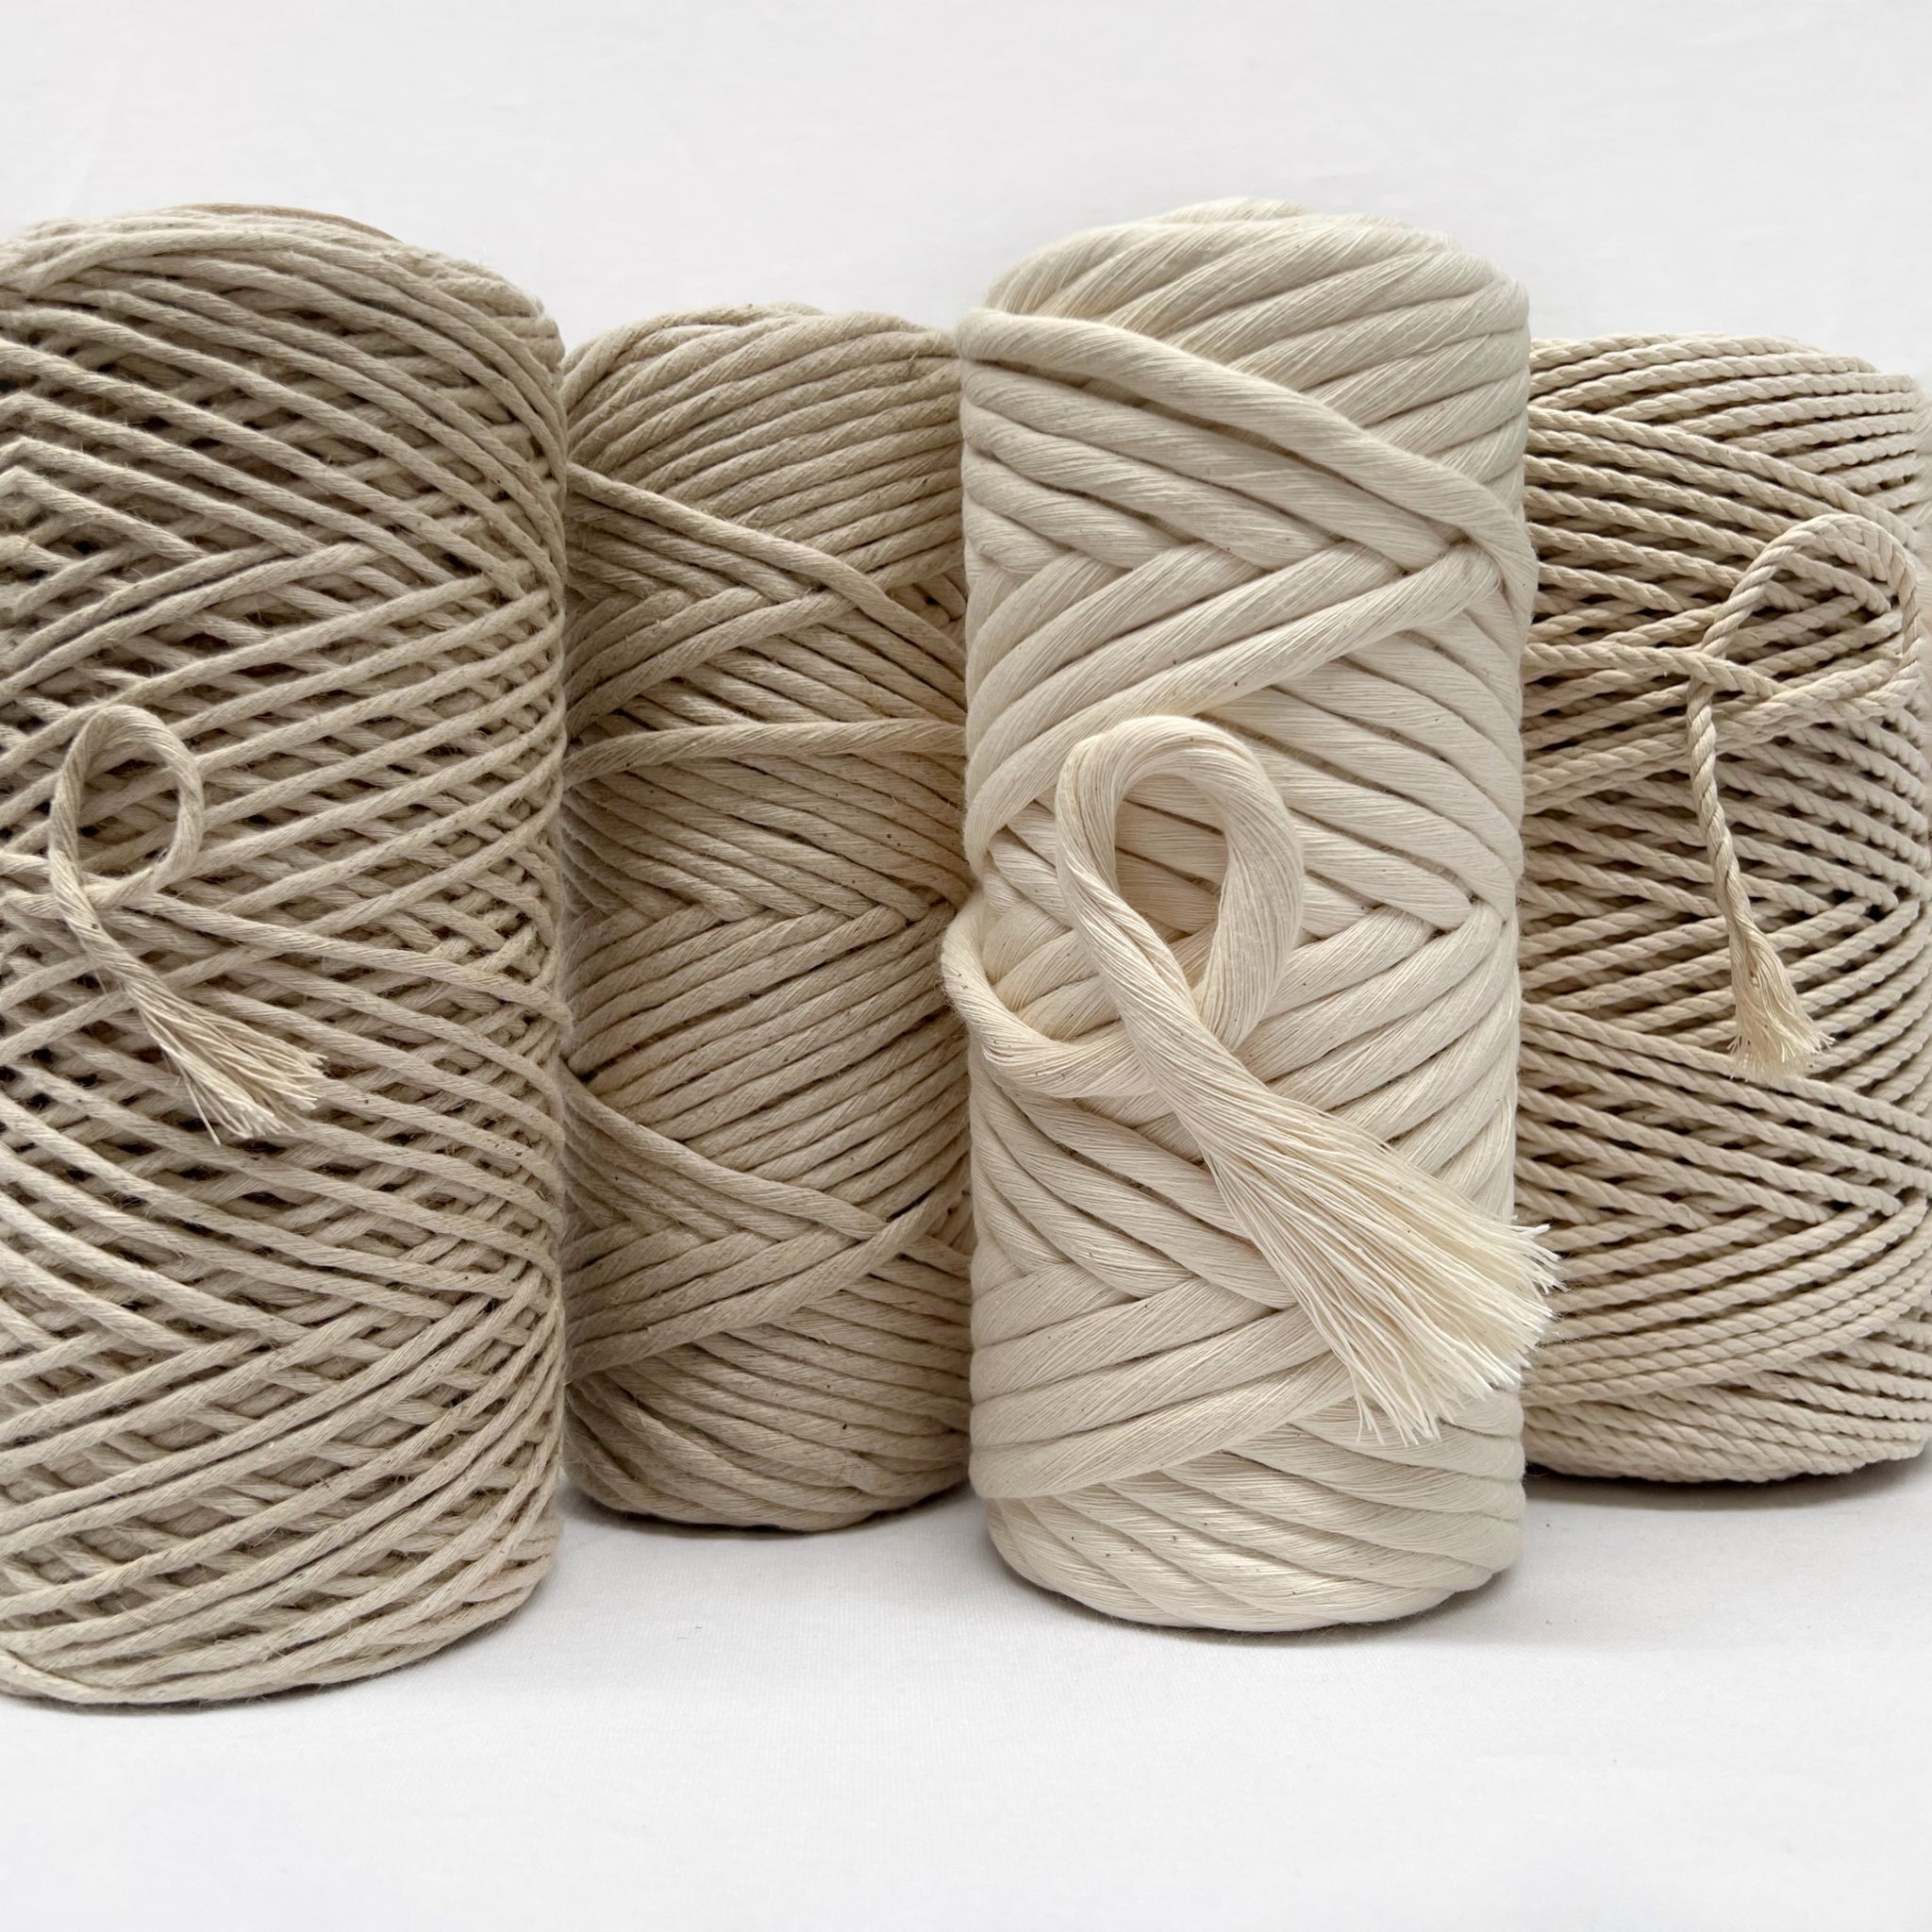 Macrame Cotton Rope // Natural 4mm - Wholesale Available - Mary Maker  Studio - Macrame & Weaving Supplies and Education.